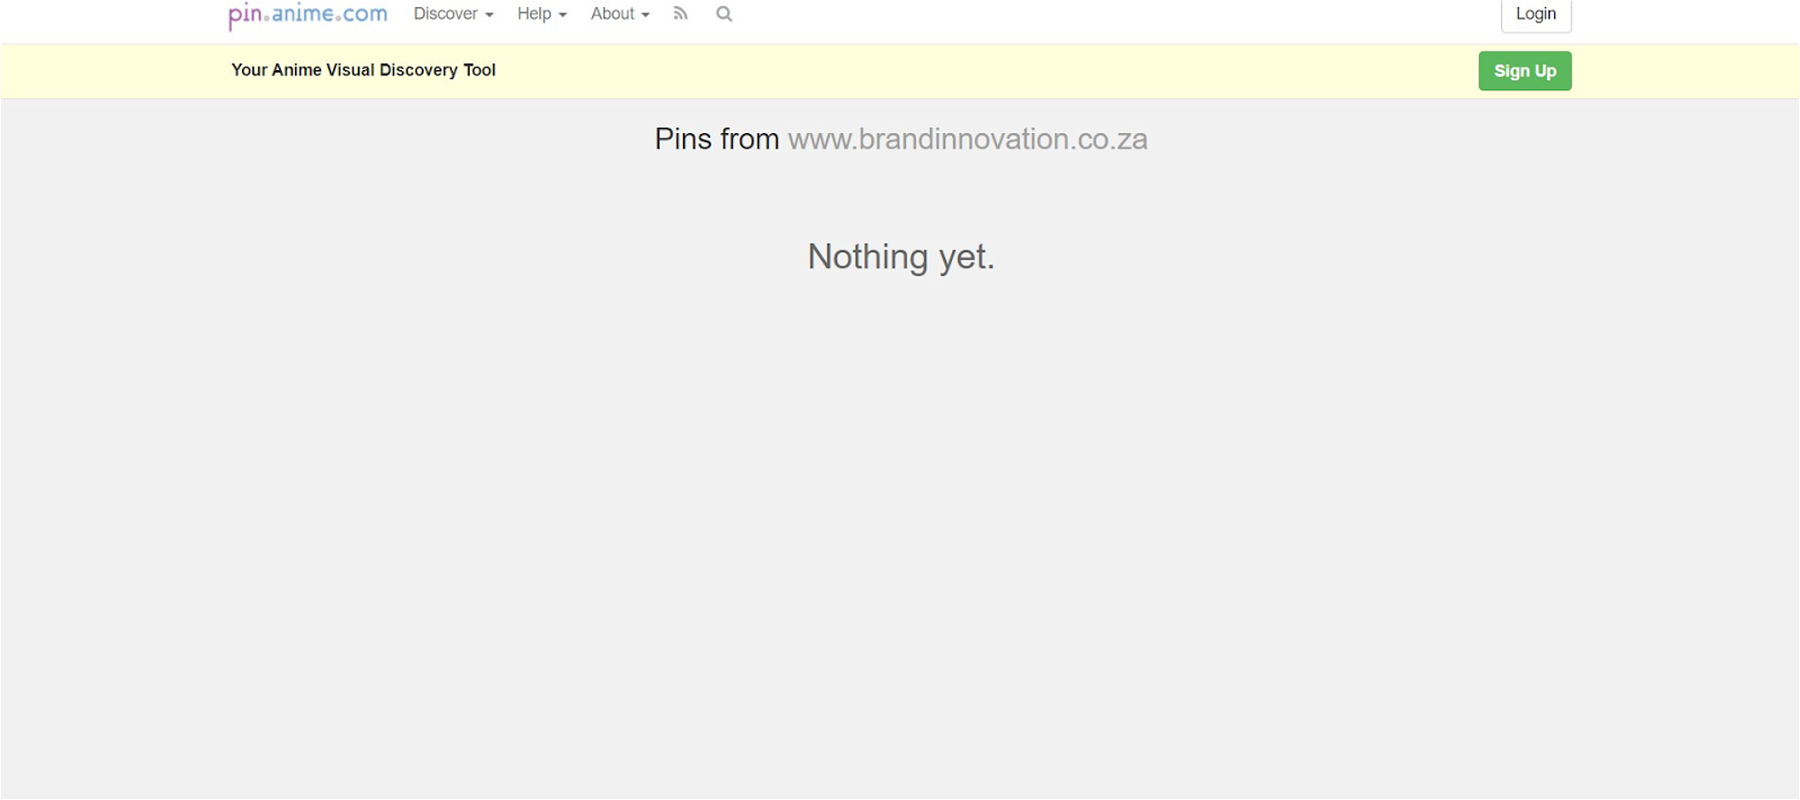 A DR 52 site linking out to brandinnovation.co.za